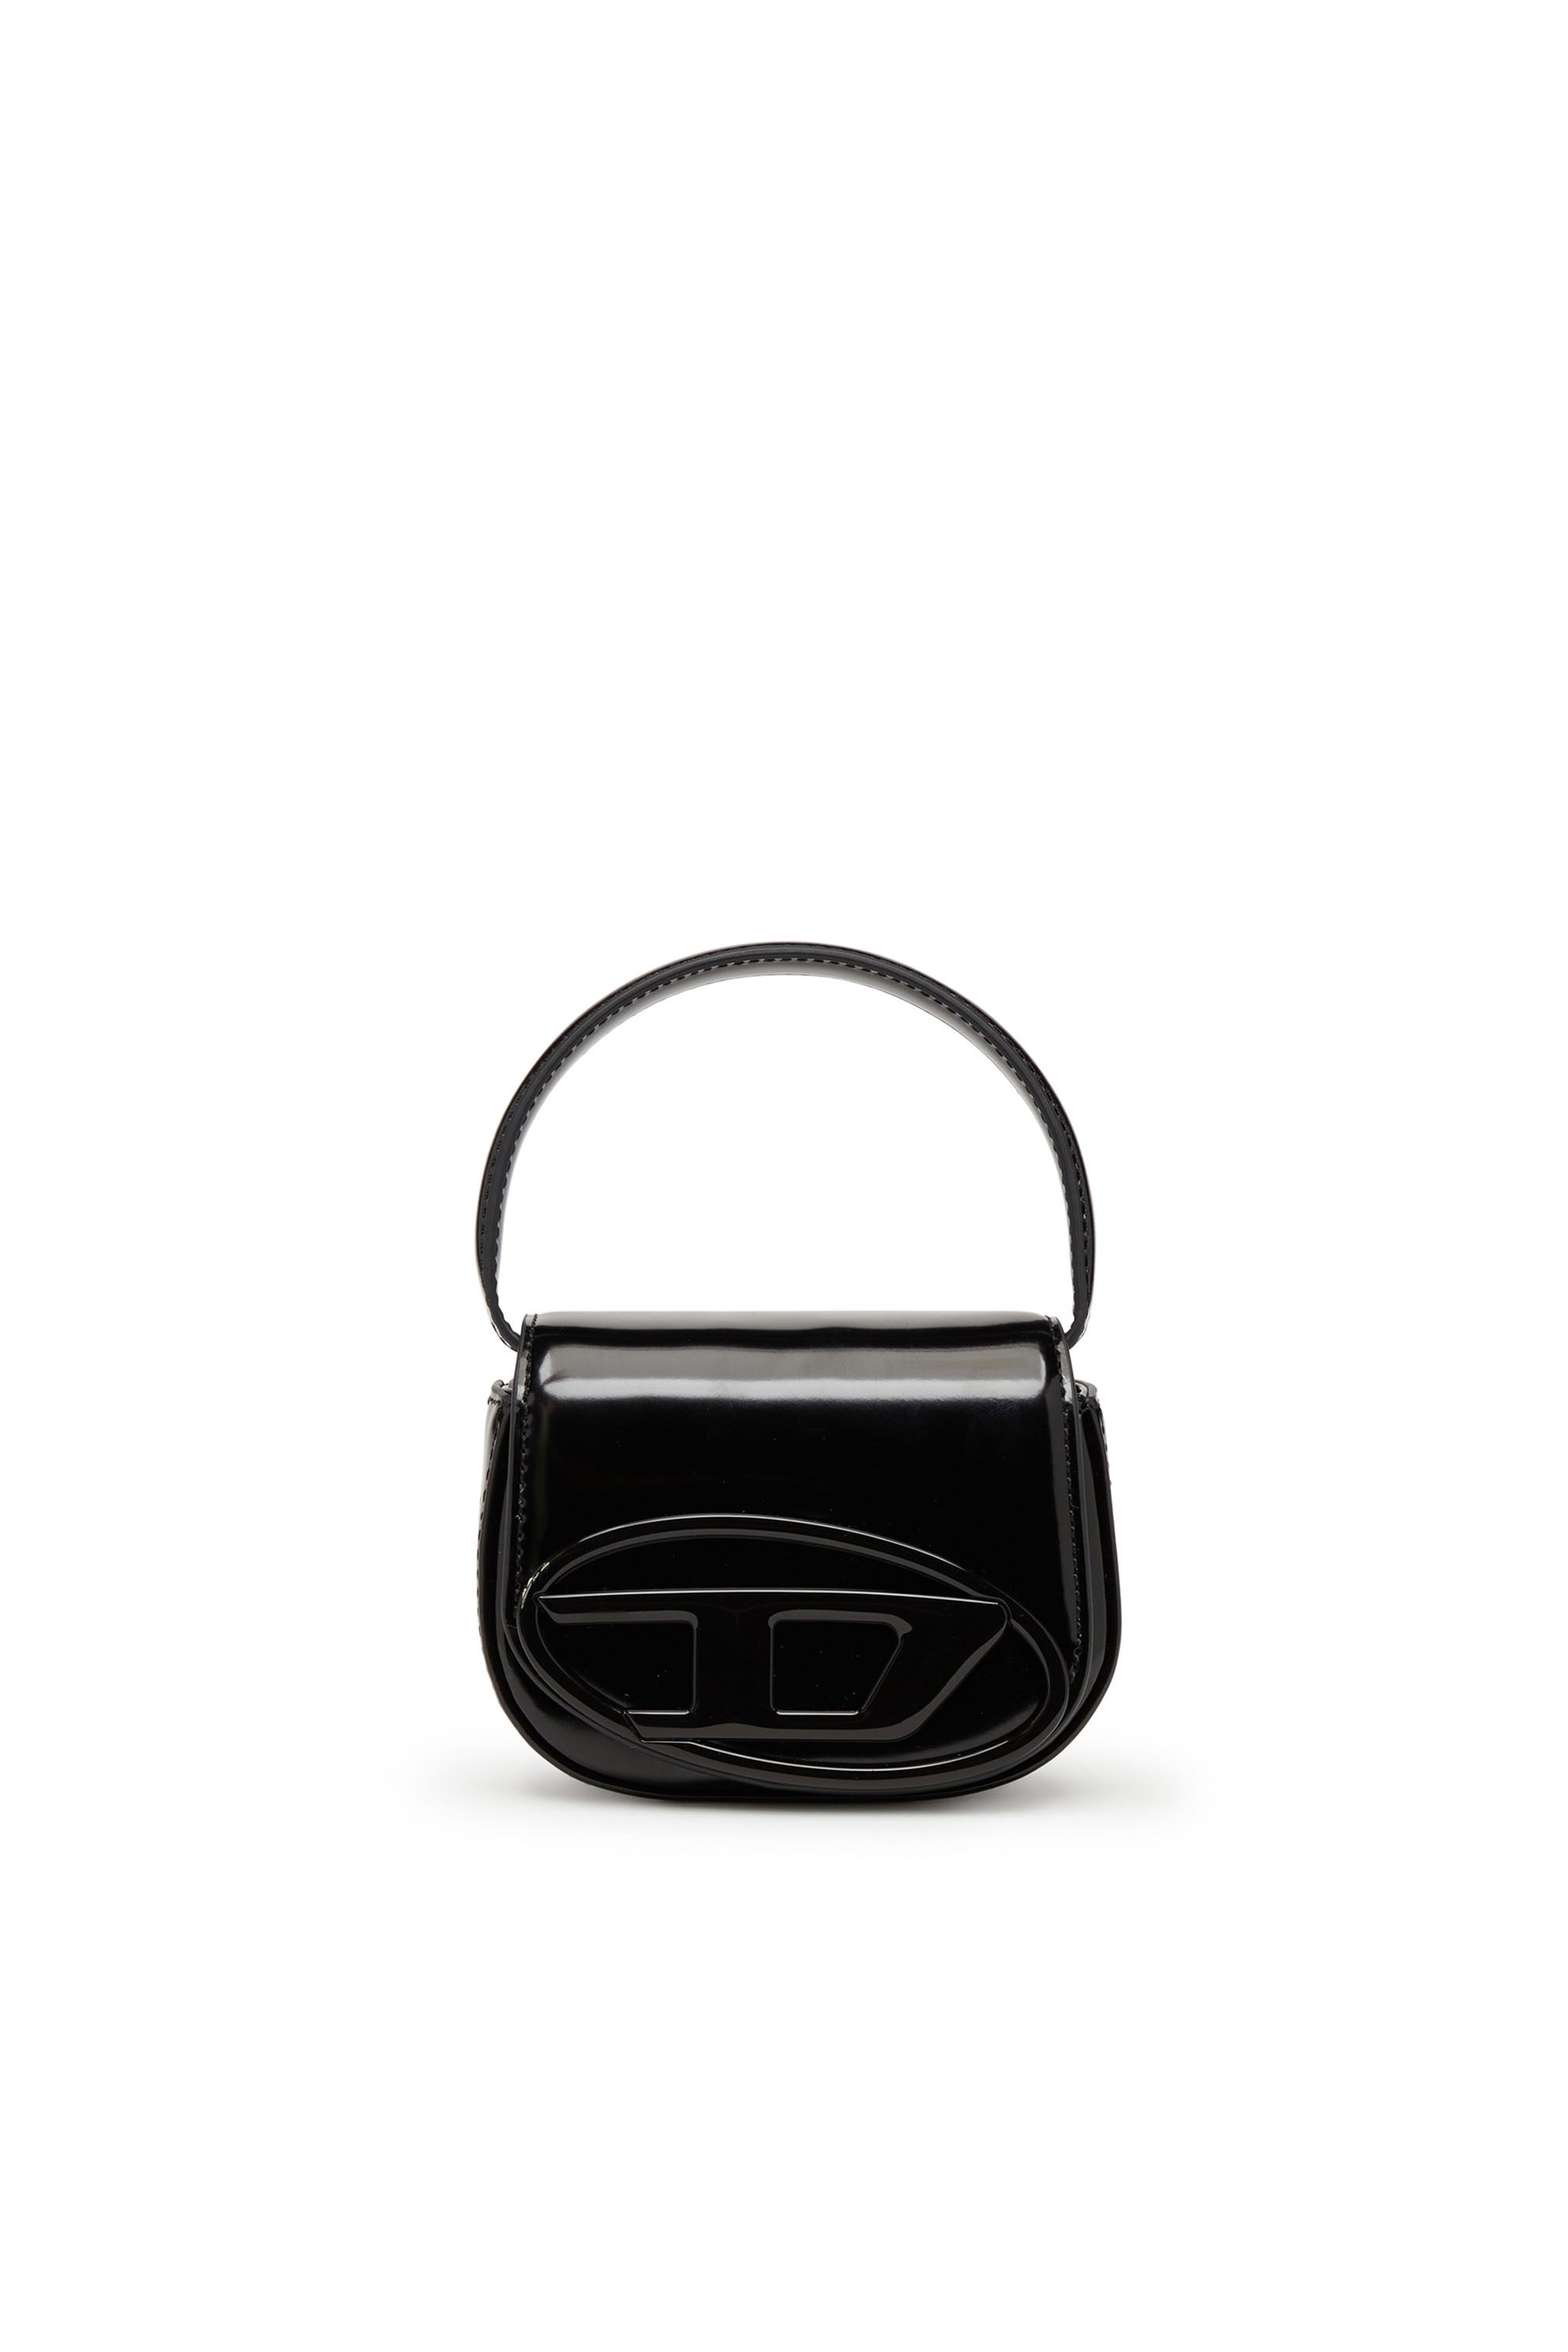 Diesel - 1DR-XS-S, Woman 1DR-XS-S-Iconic mini bag in mirrored leather in Black - Image 1